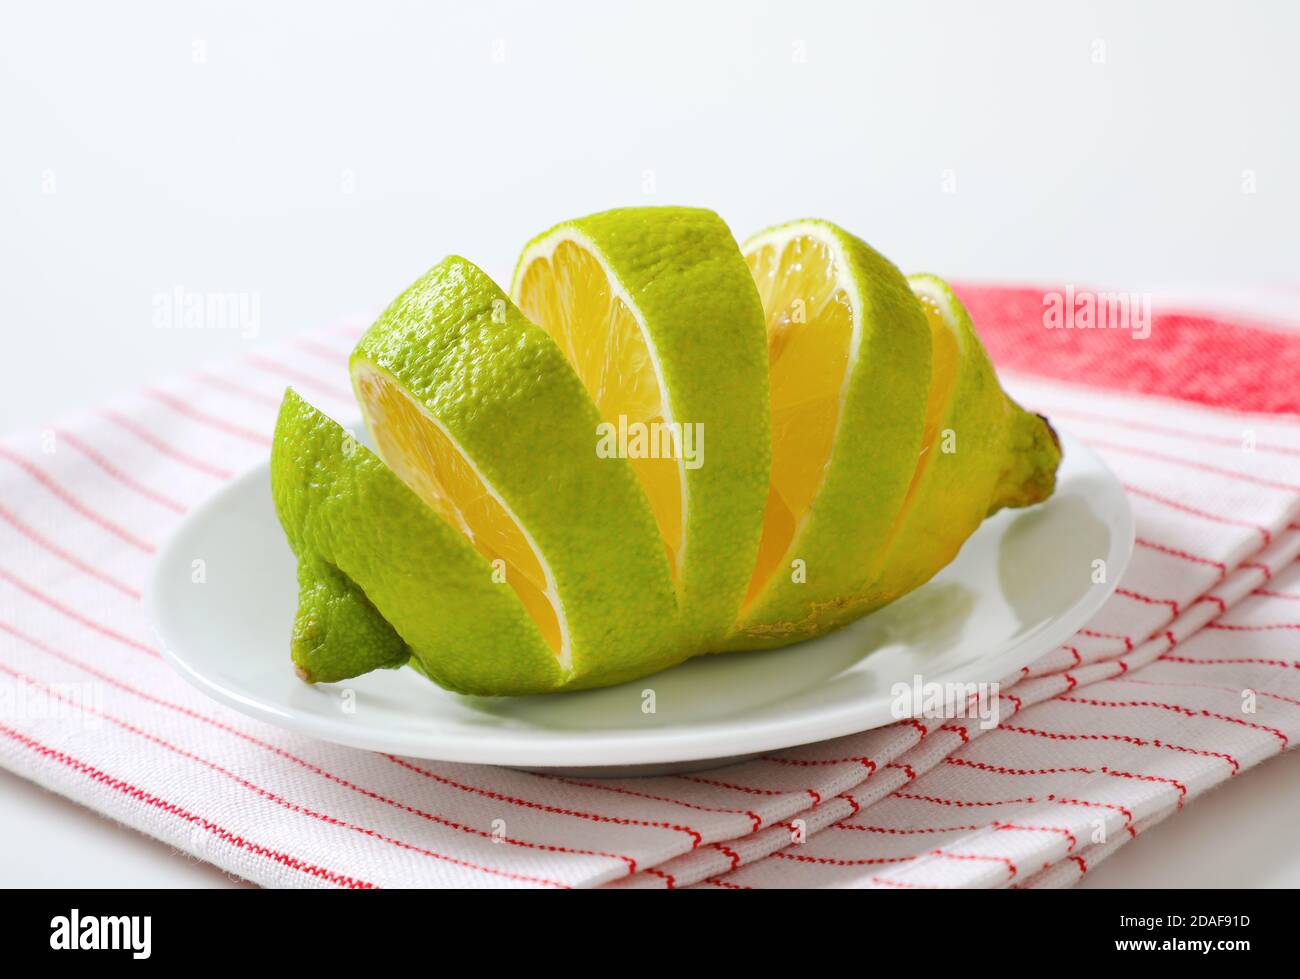 Lemon with green peel and yellow flesh, sliced on white plate Stock Photo